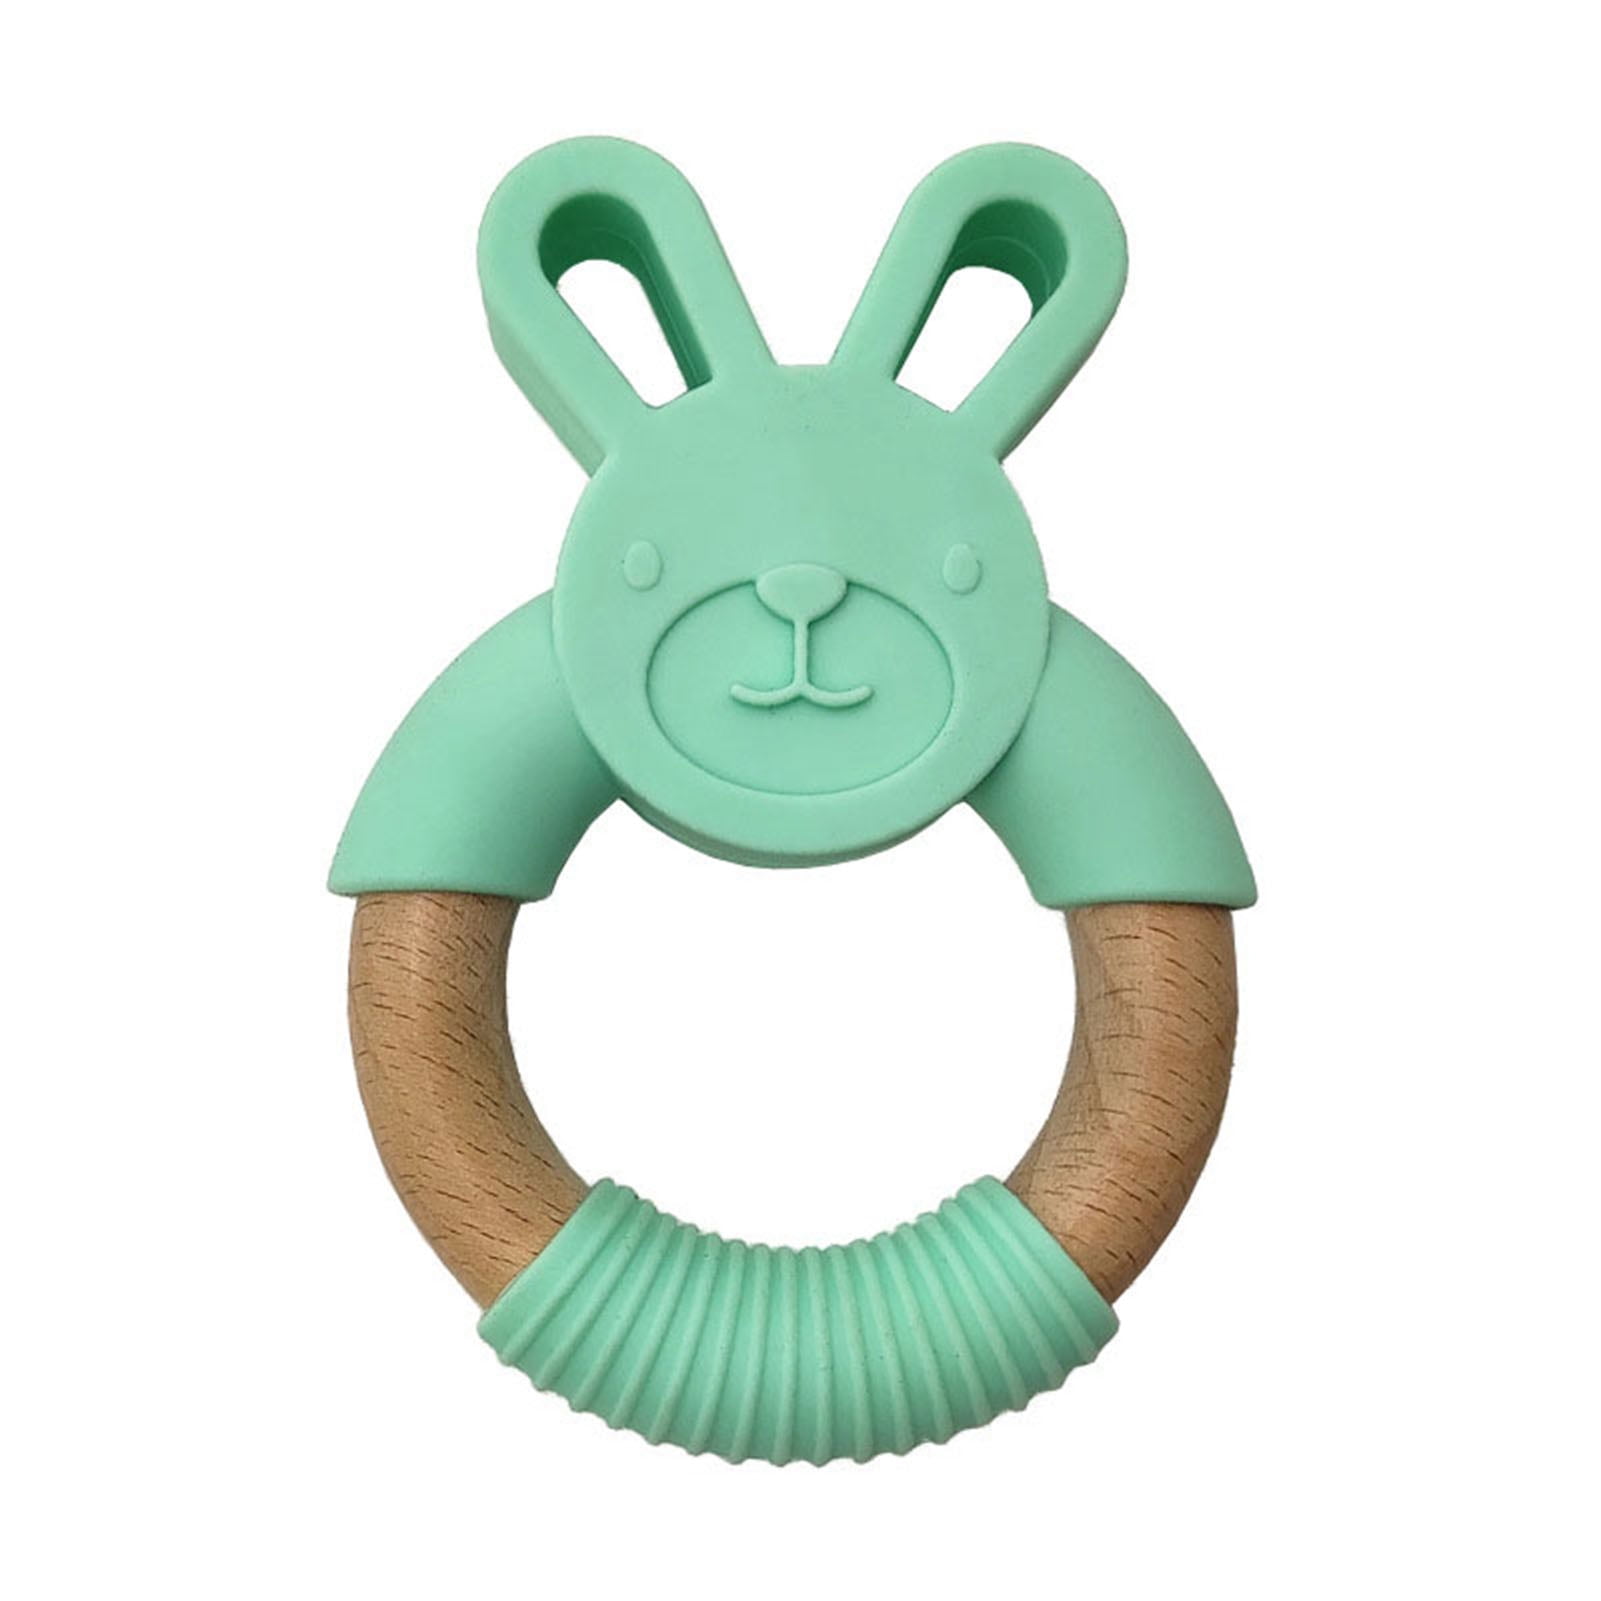 Hot sale Safe Natural Wooden Animal Shape Ring Baby Teether Teething Toy Shower 